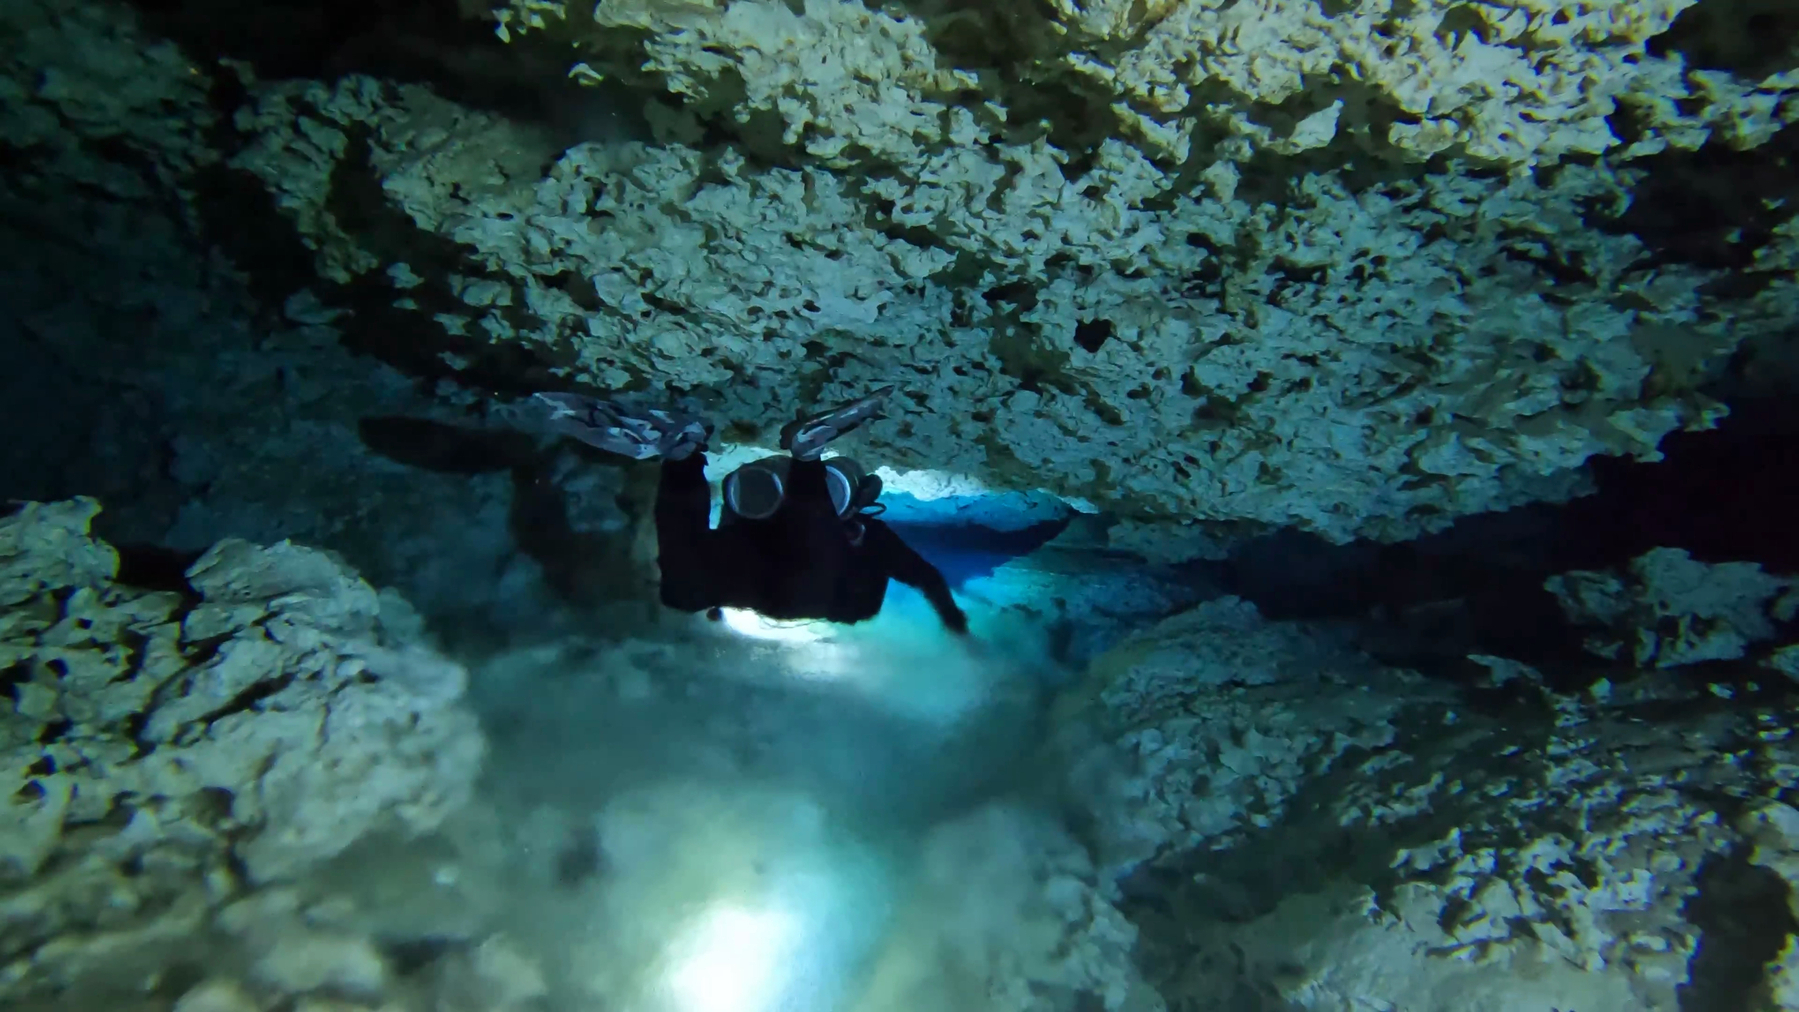 A diver swimming through a brightly lit white pock marked cave, their hand dragging through the halocline mixing the fresh and salt water layers, trailing a blurry interface behind them.